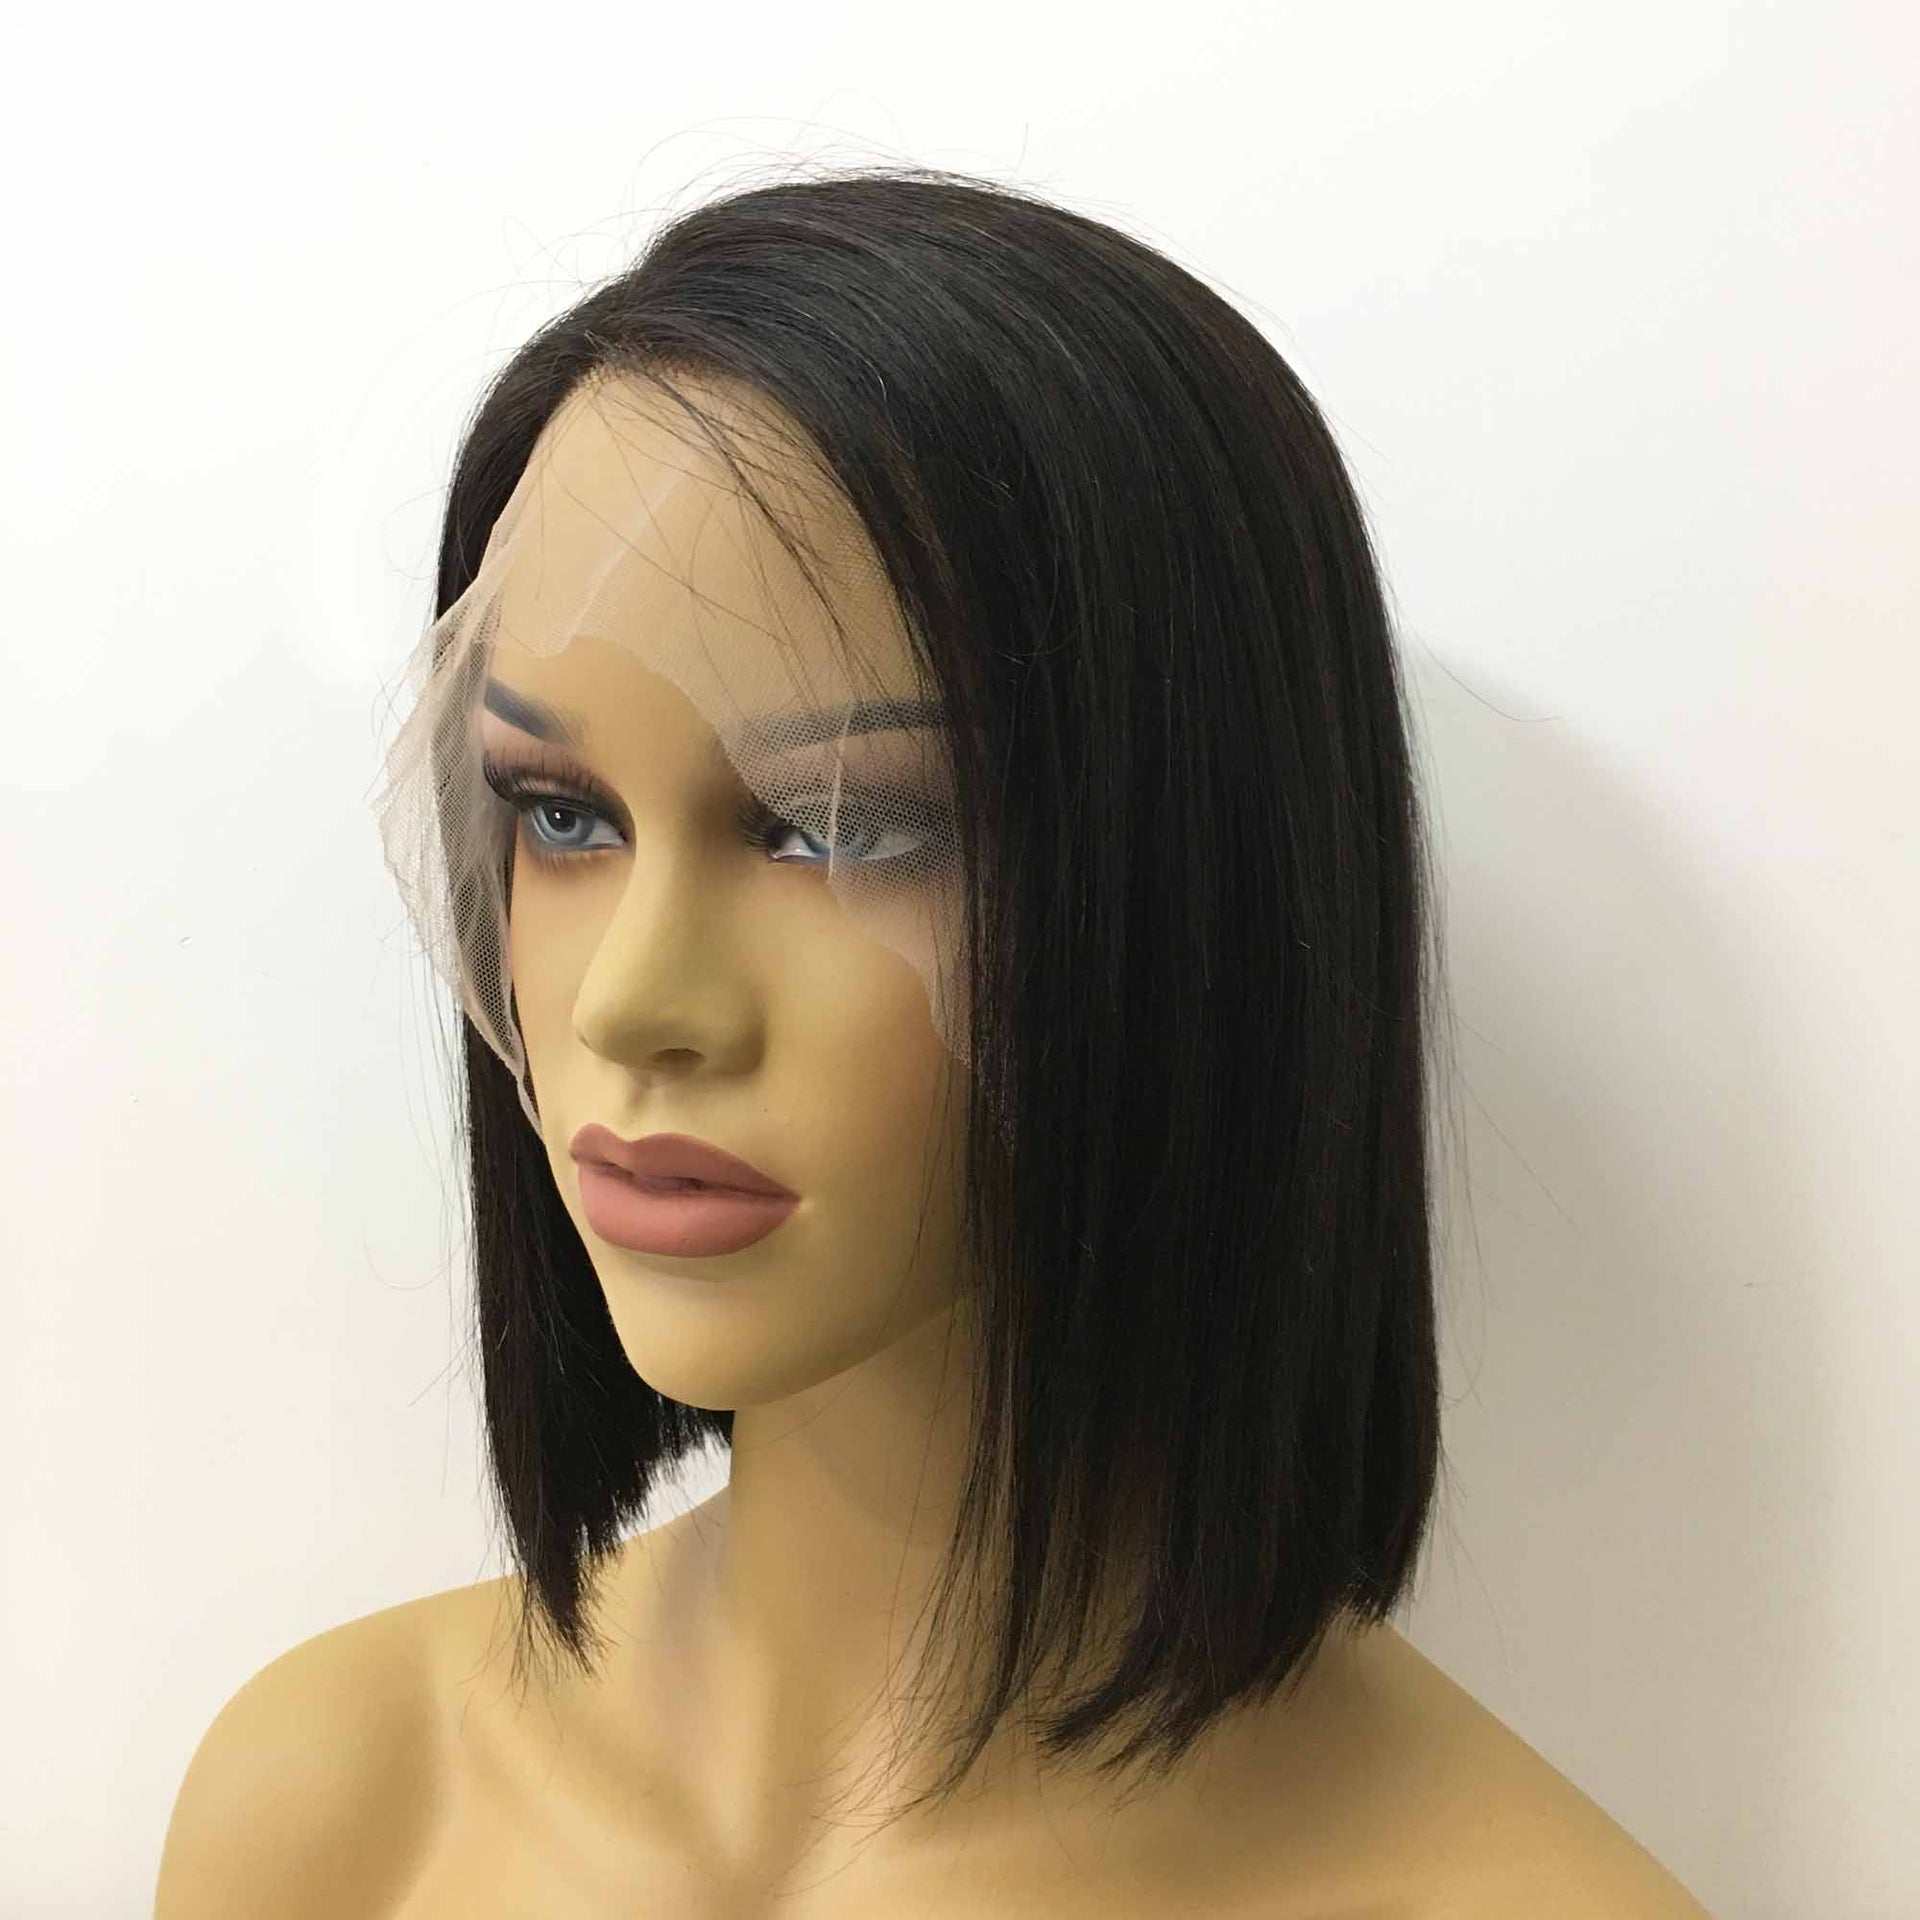 nevermindyrhead Women Natural Black Human Hair 13X6 Lace Front Medium Length Straight Side Part Wig